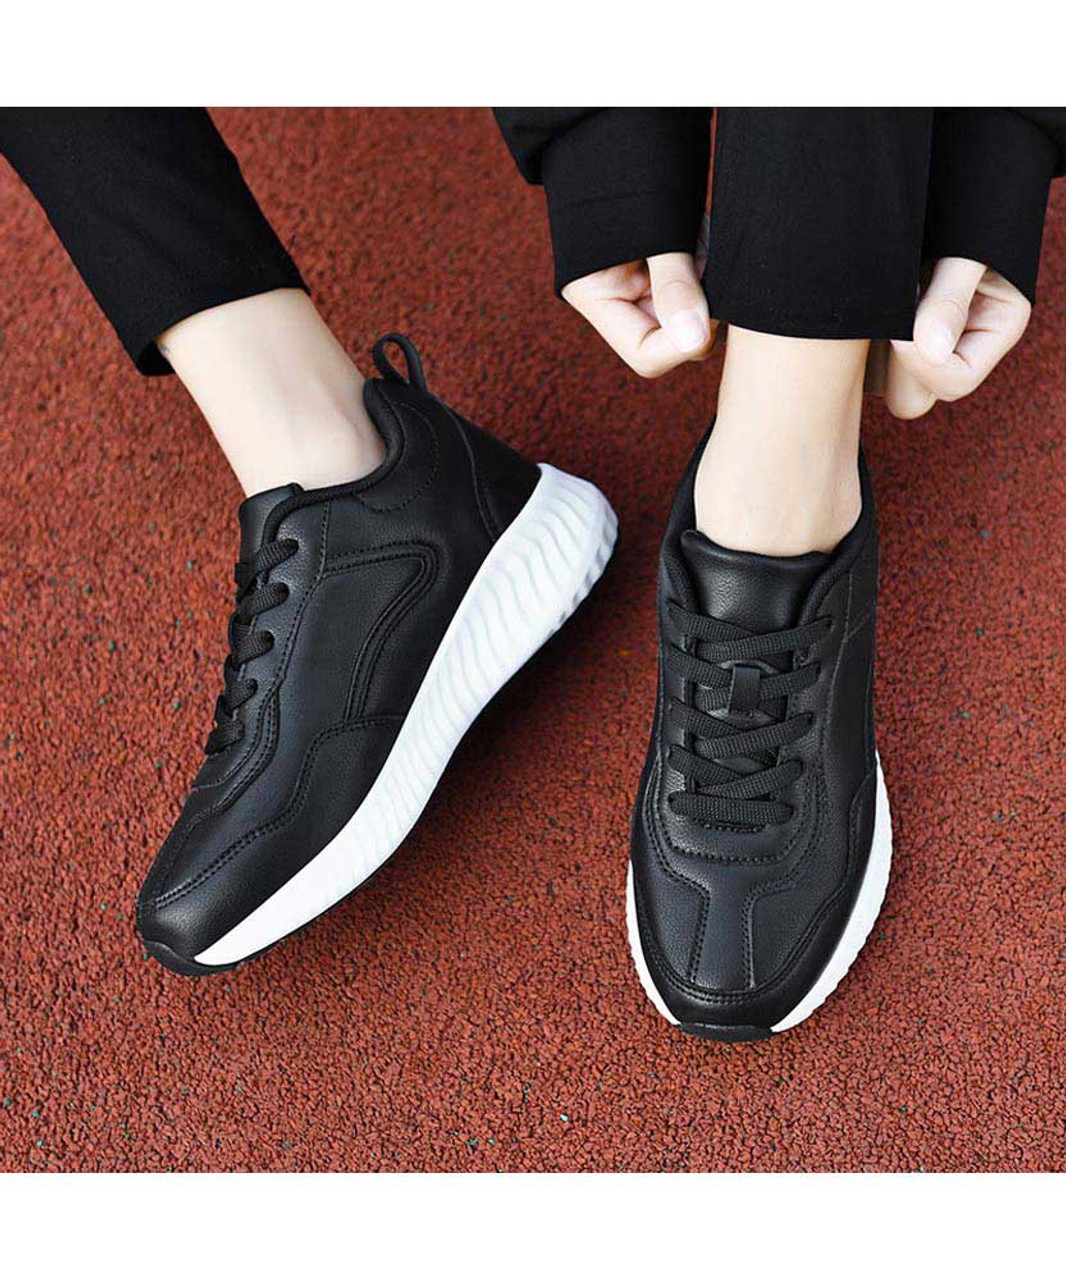 Black white casual plain lace up shoe sneaker | Womens sneakers shoes ...